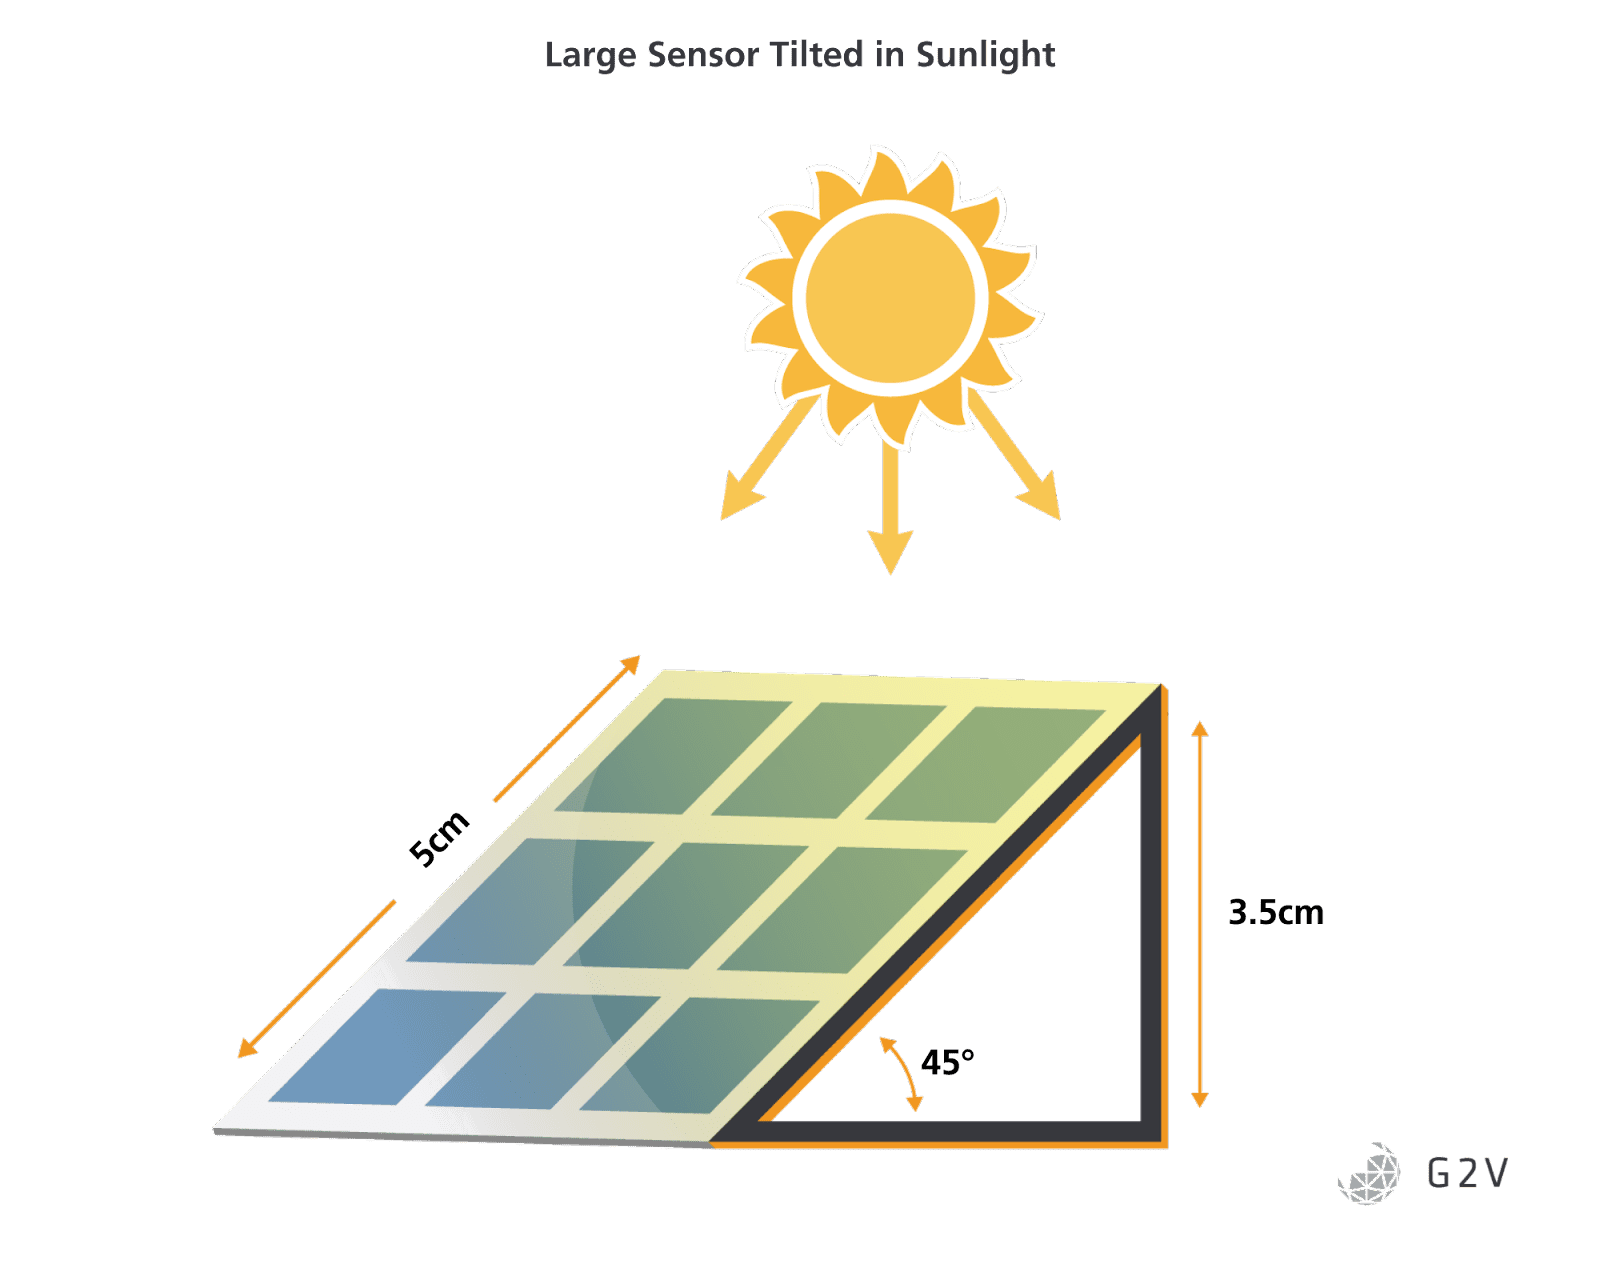 A large sensor, when tilted, will have its front edge 3.5 cm closer to the light source compared to its back edge. This difference will likely result in a large difference of irradiance between the two areas, depending on the solar simulator’s change of irradiance with distance.